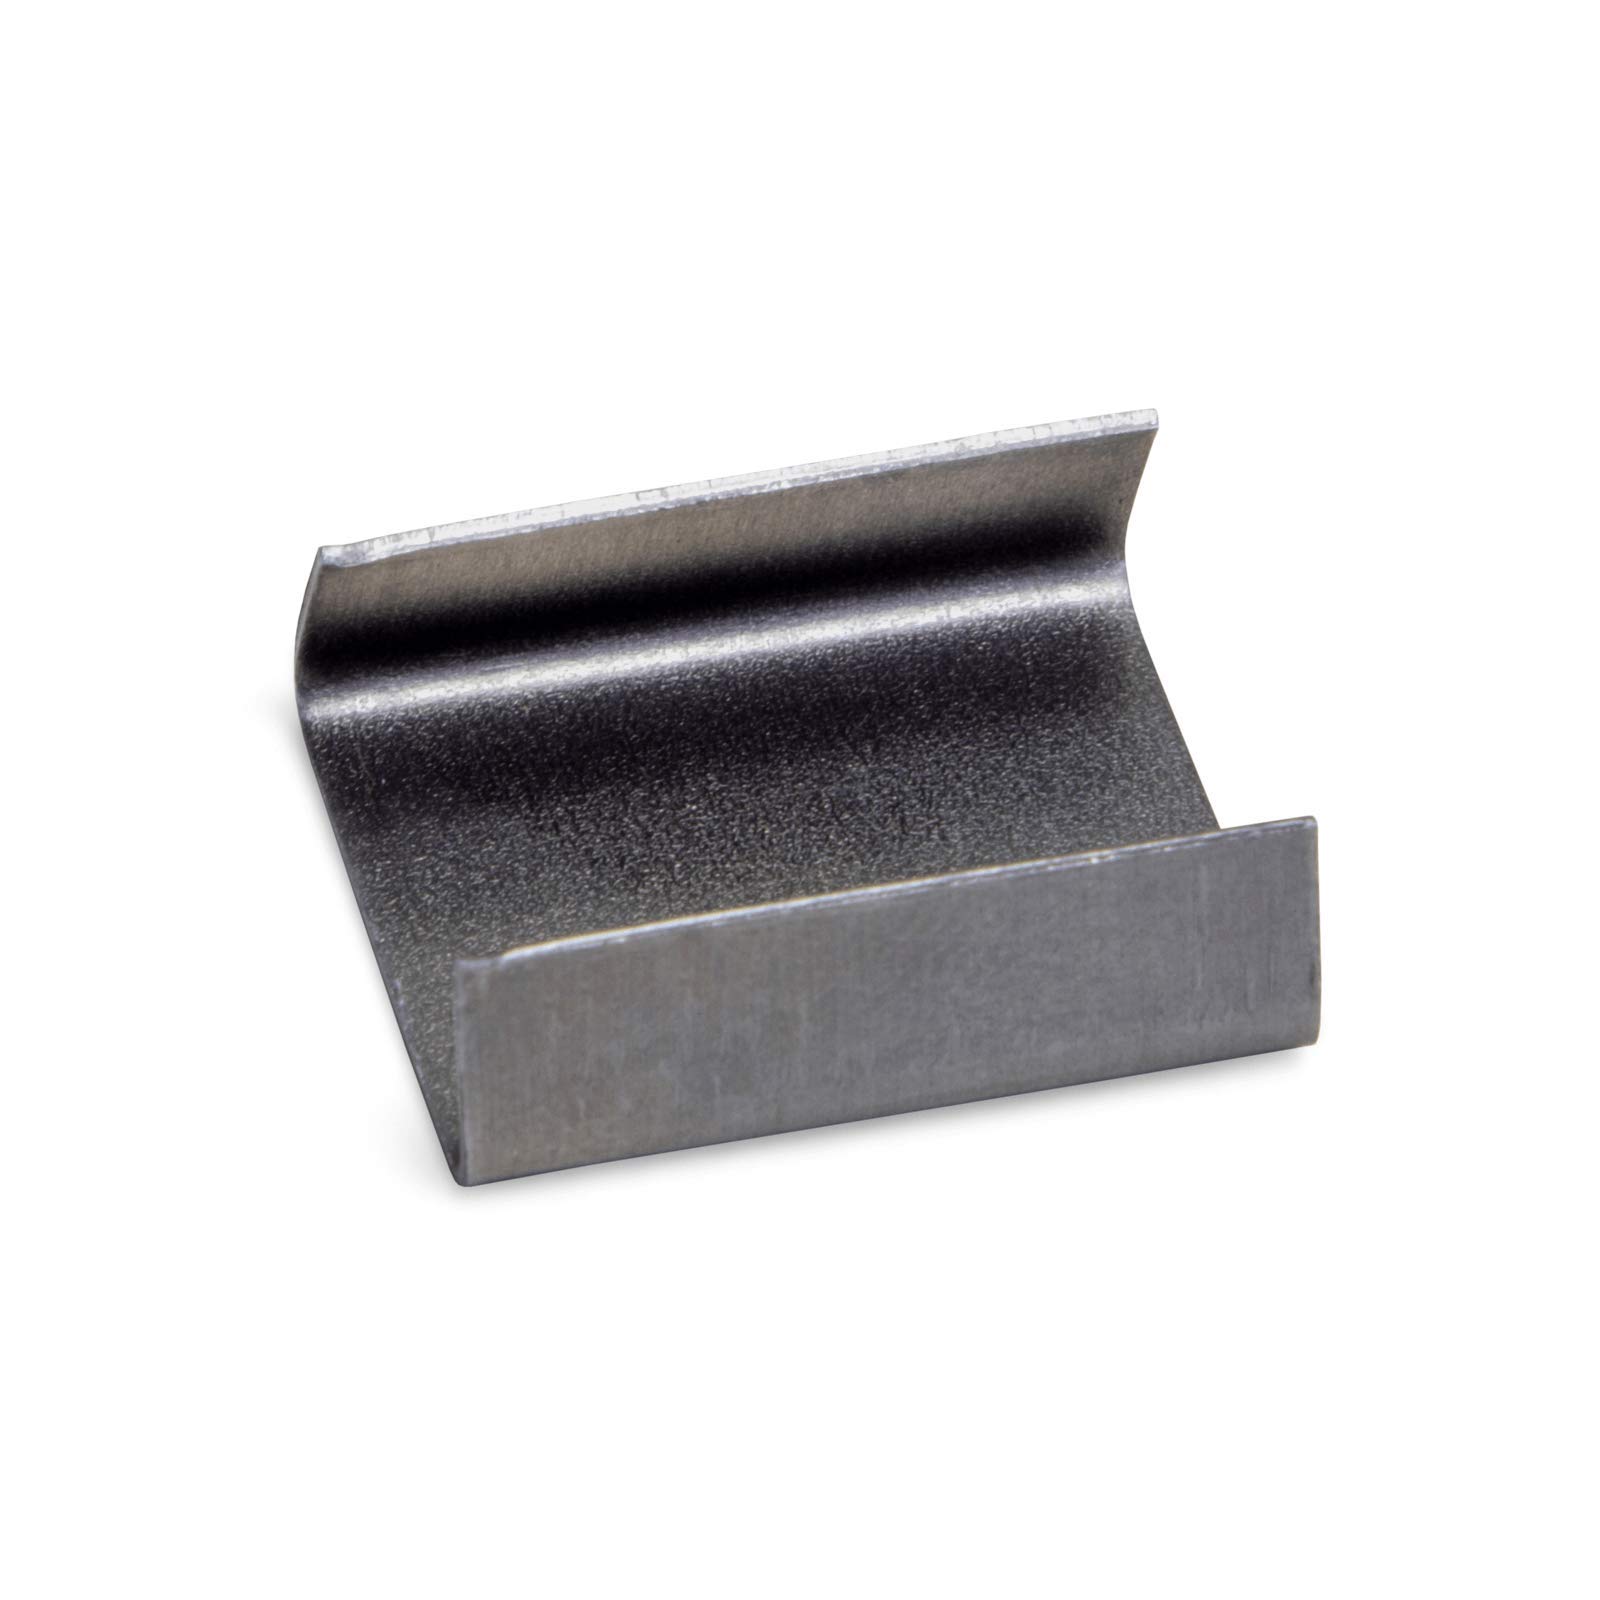 3/4" OPEN STEEL STRAPPING SEALS (1000 PIECES) - Kilrich Building Centres